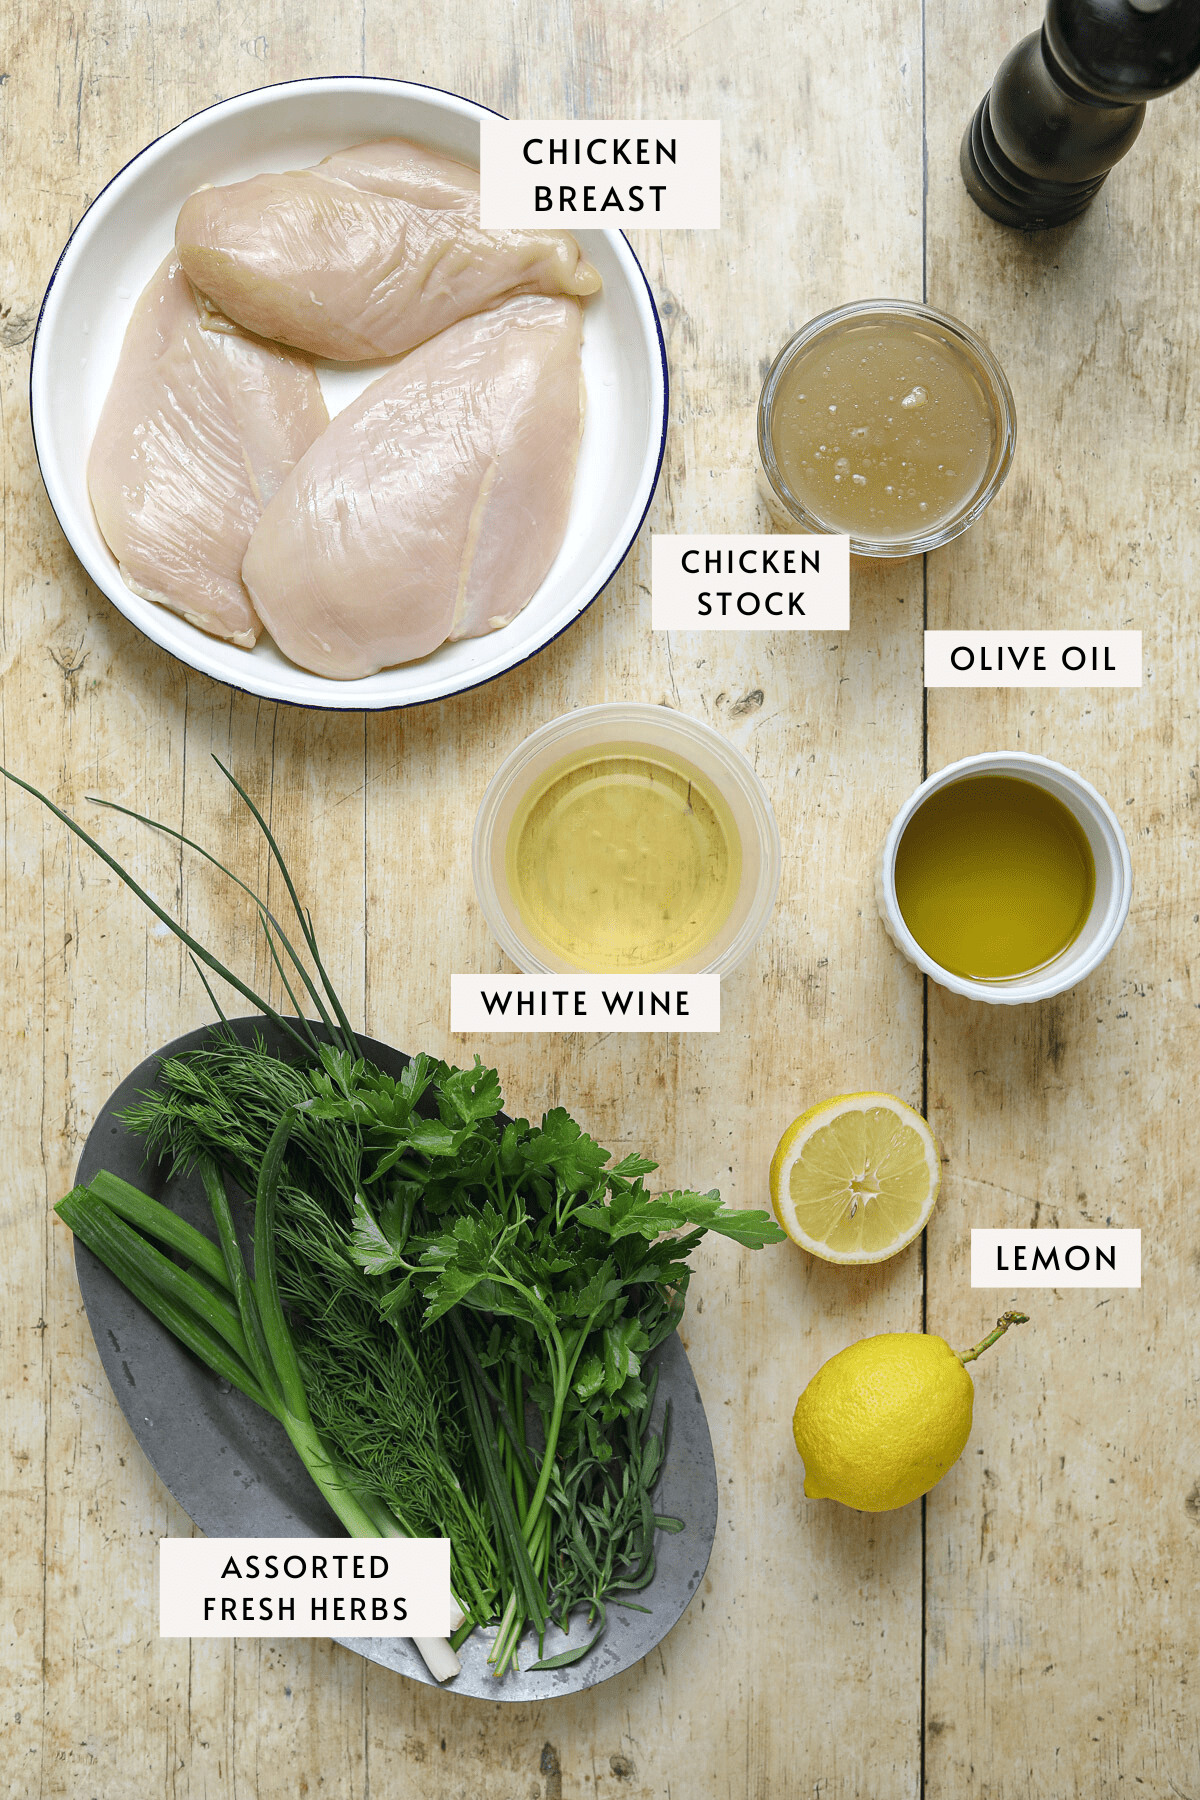 Recipe ingredients measured out individually; a bowl of raw chicken, a white dish of olive oil, a lemon, bundles of fresh herbs and a cup of white wine.